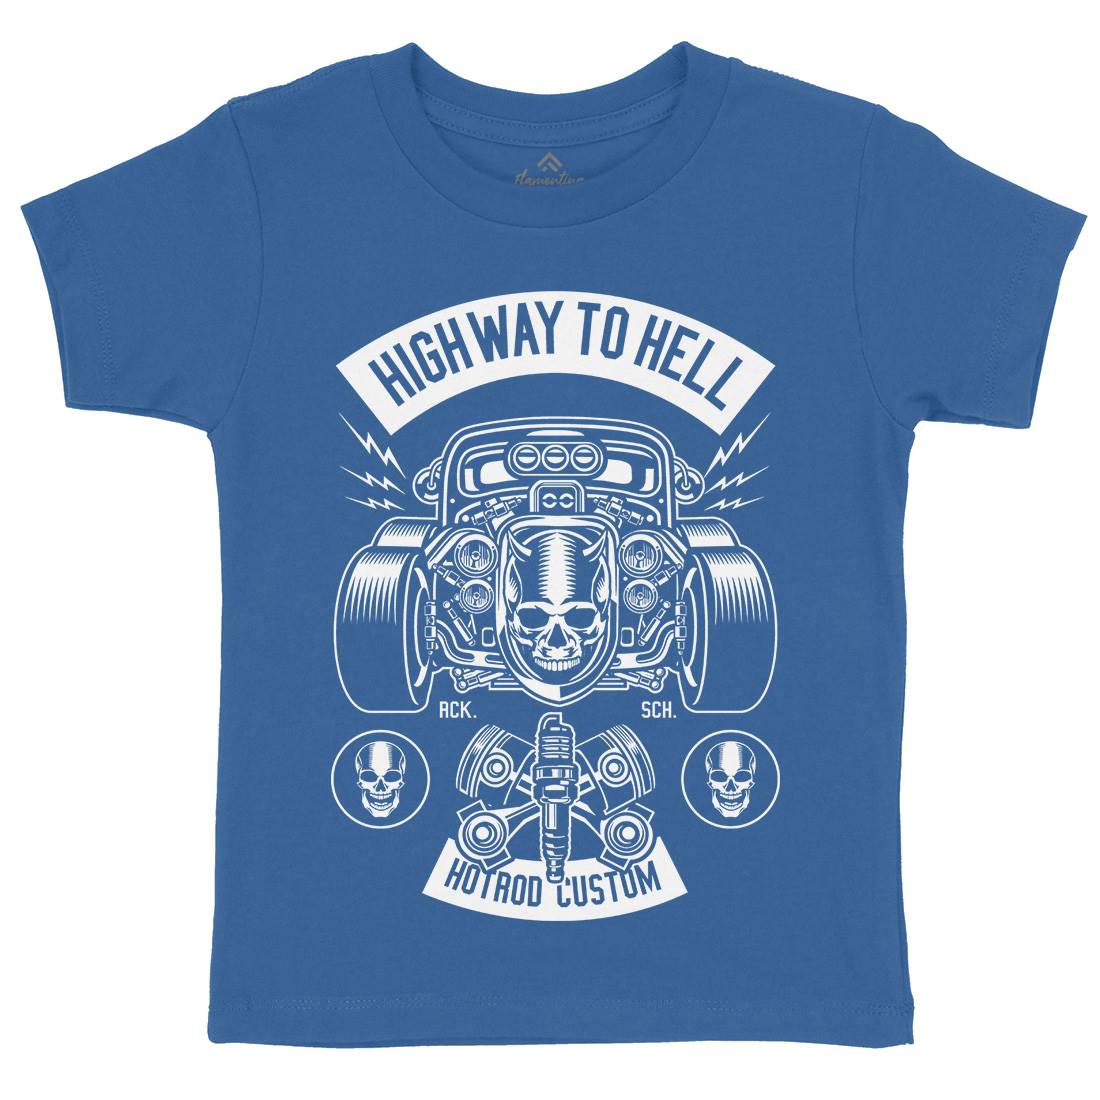 Highway To Hell Kids Crew Neck T-Shirt Cars B556